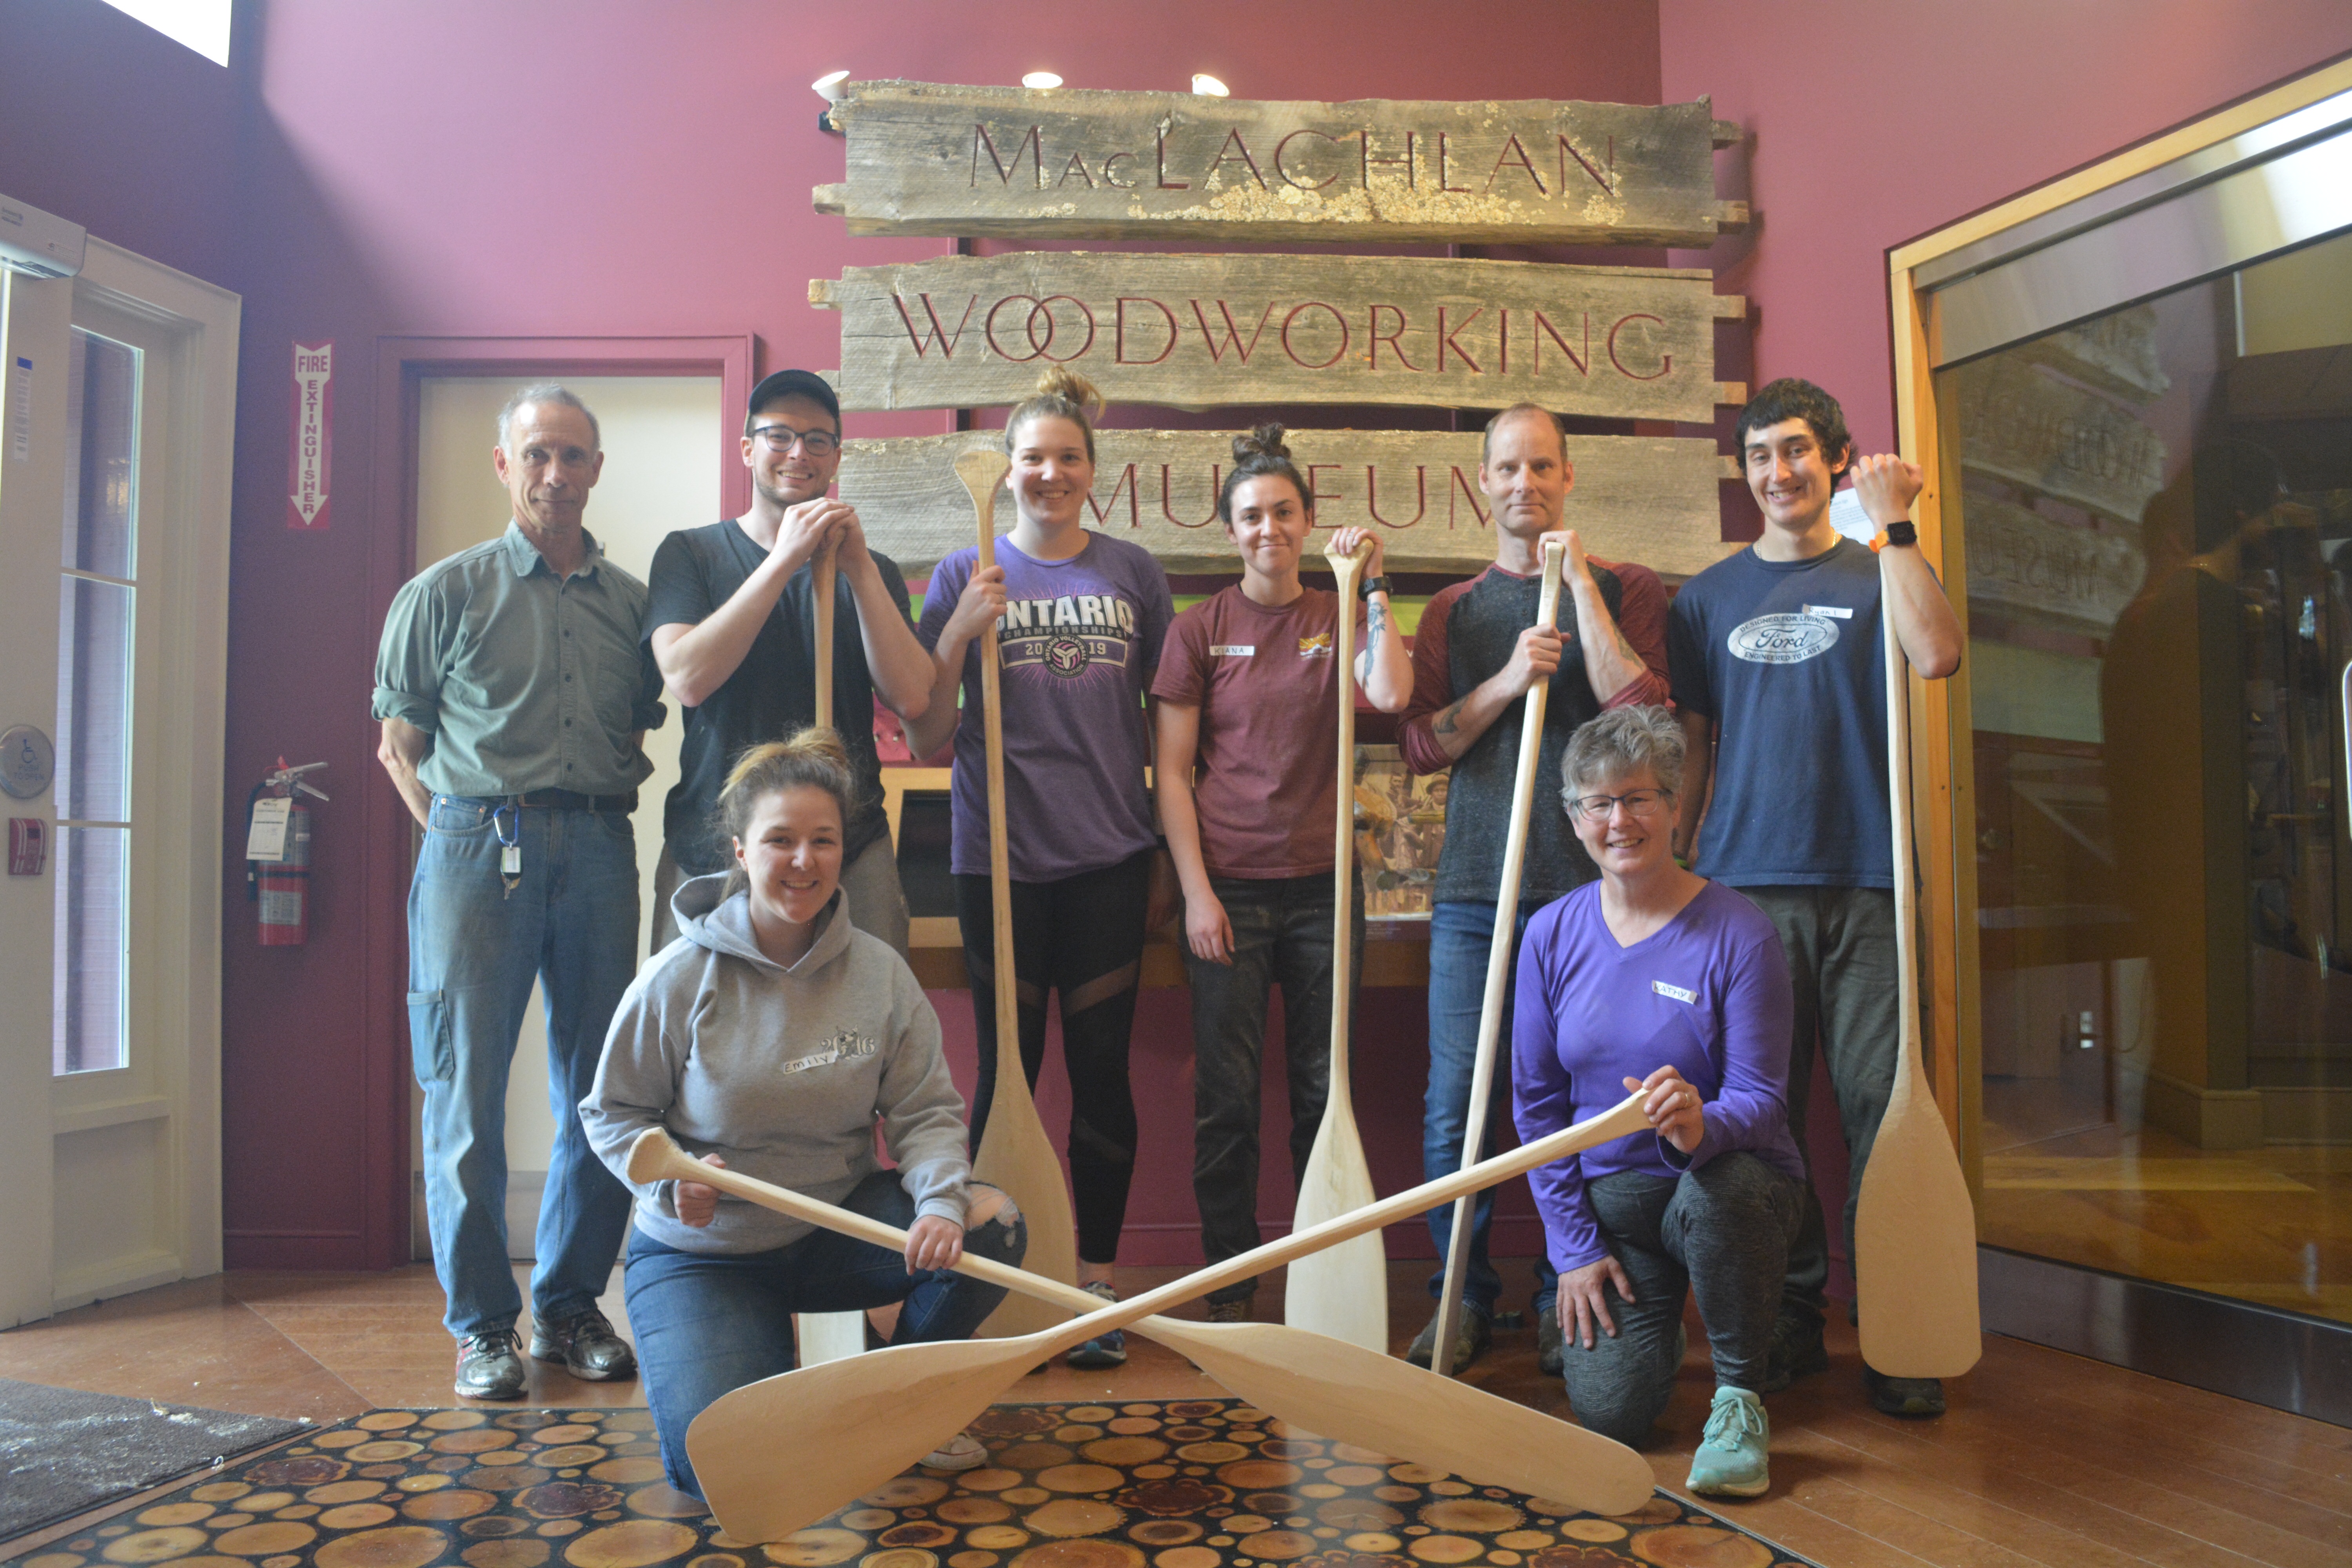 Make your own paddle workshop